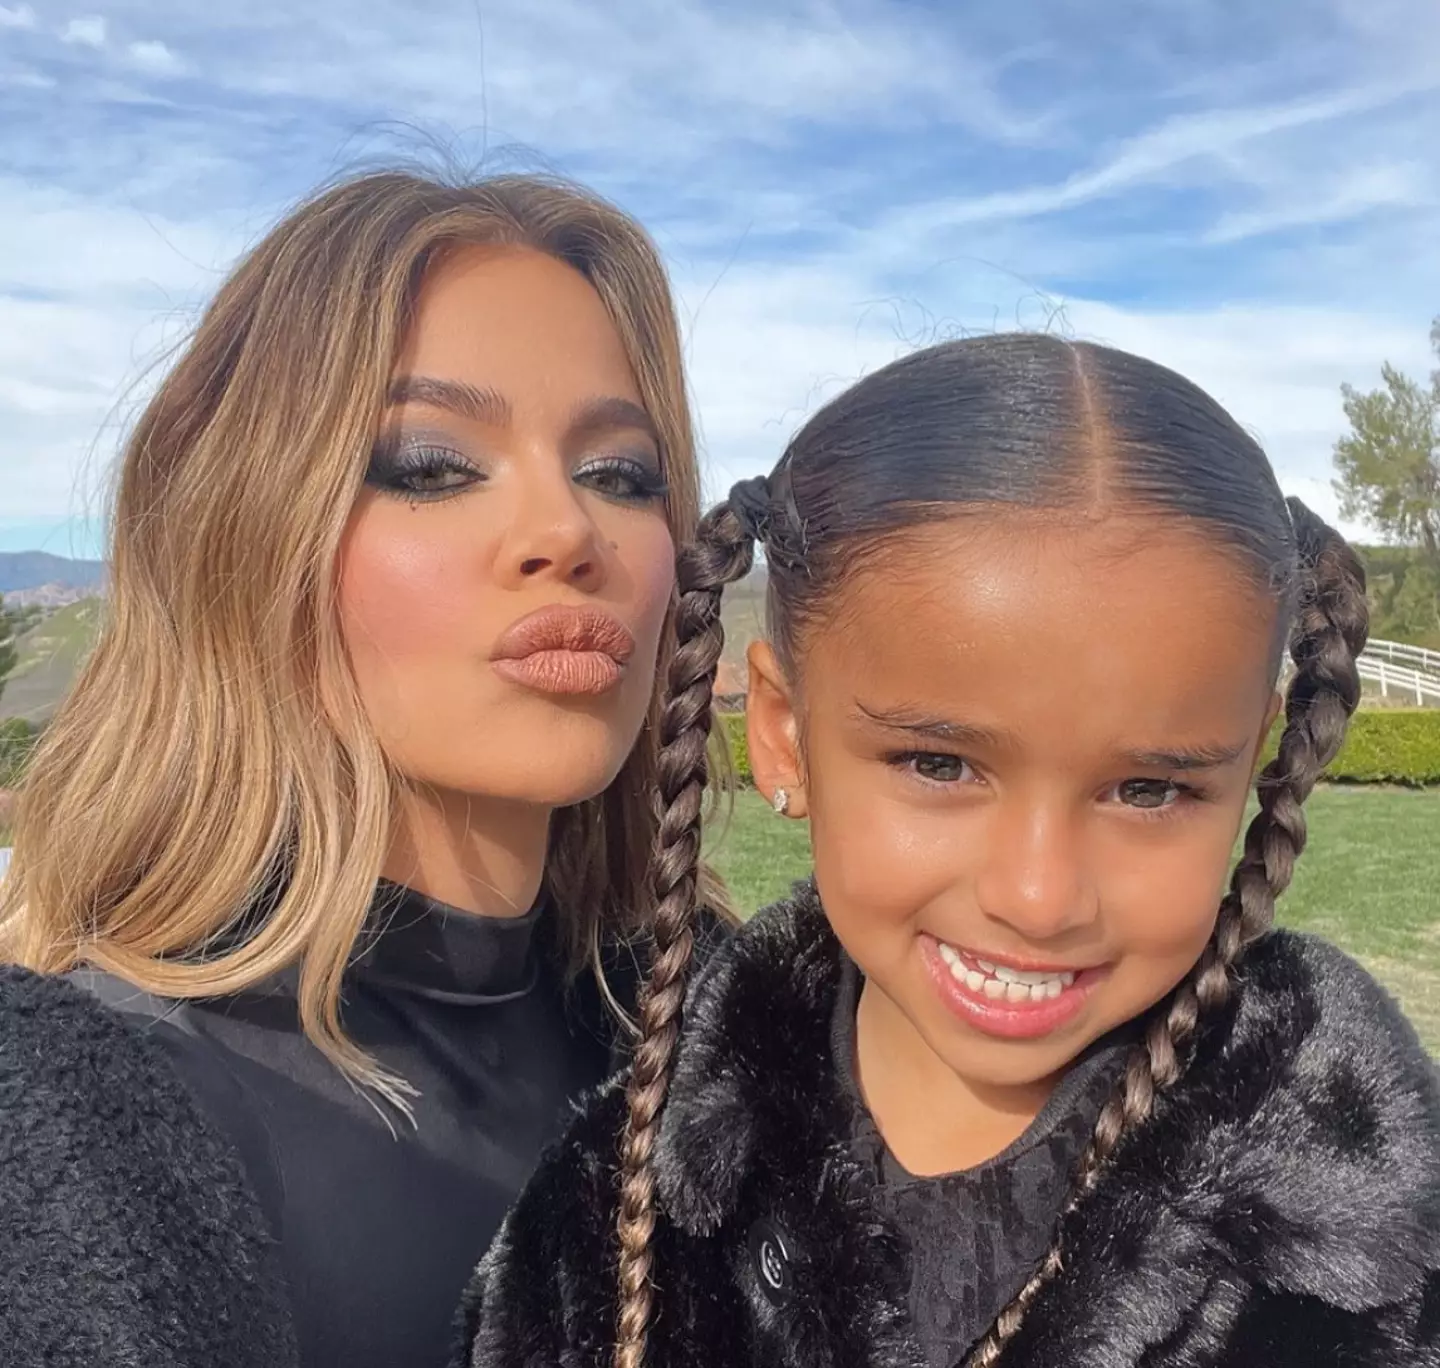 Khloe says she considers Dream and all of her nieces and nephews as her 'babies'.